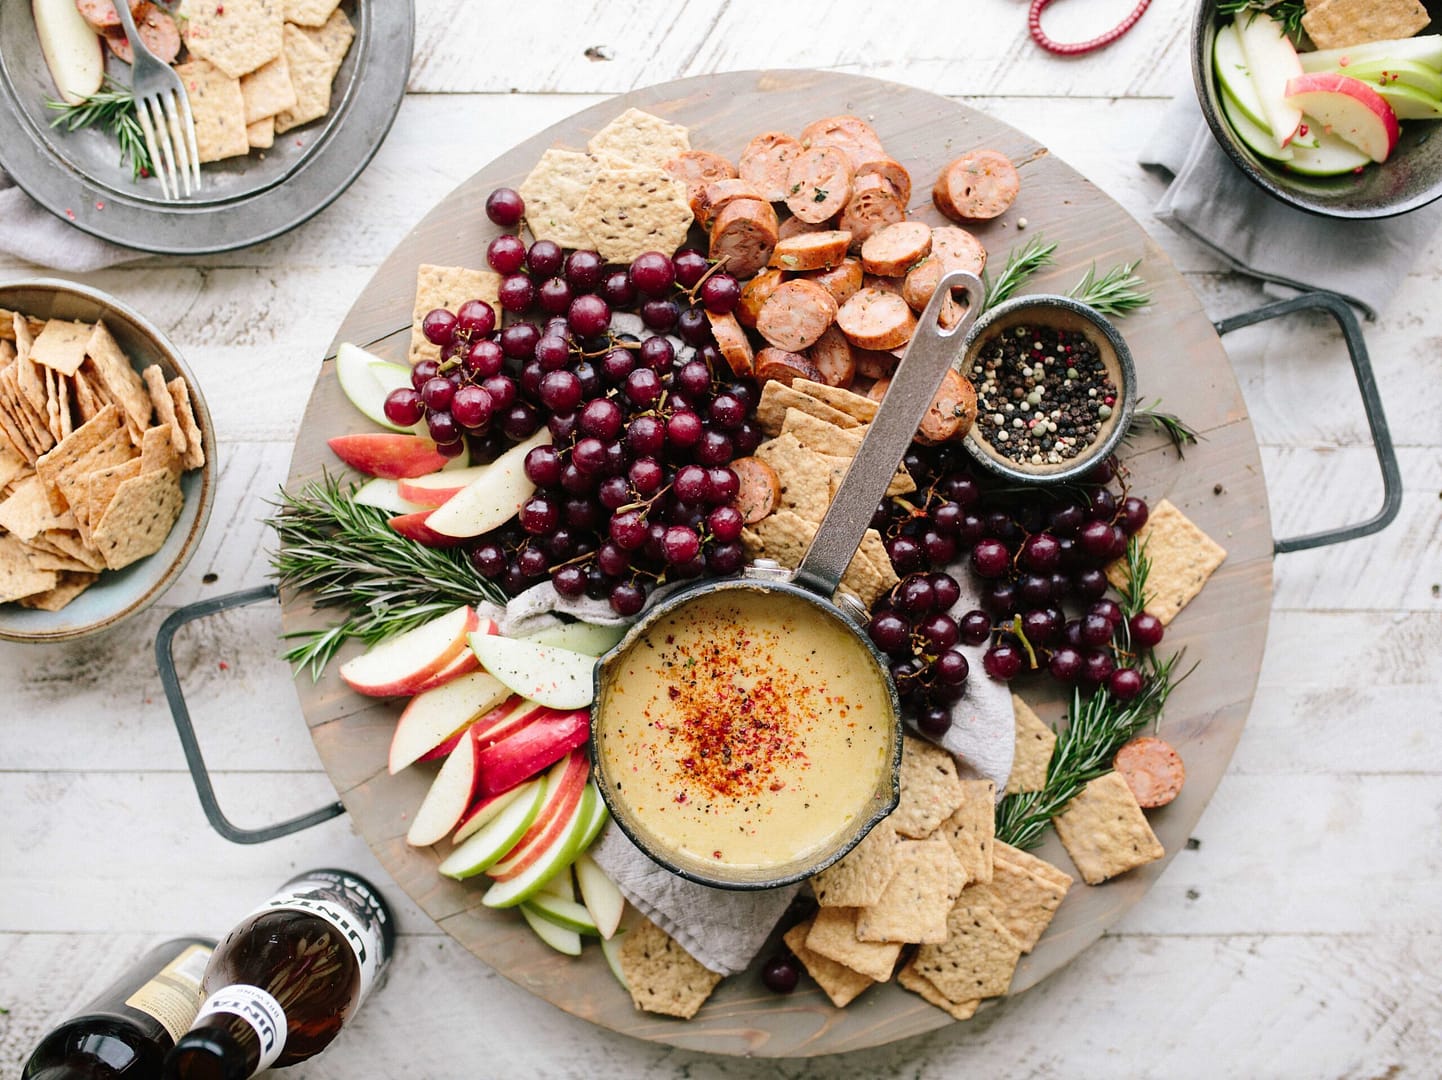 Appetizer platter for healthy eating over the holidays